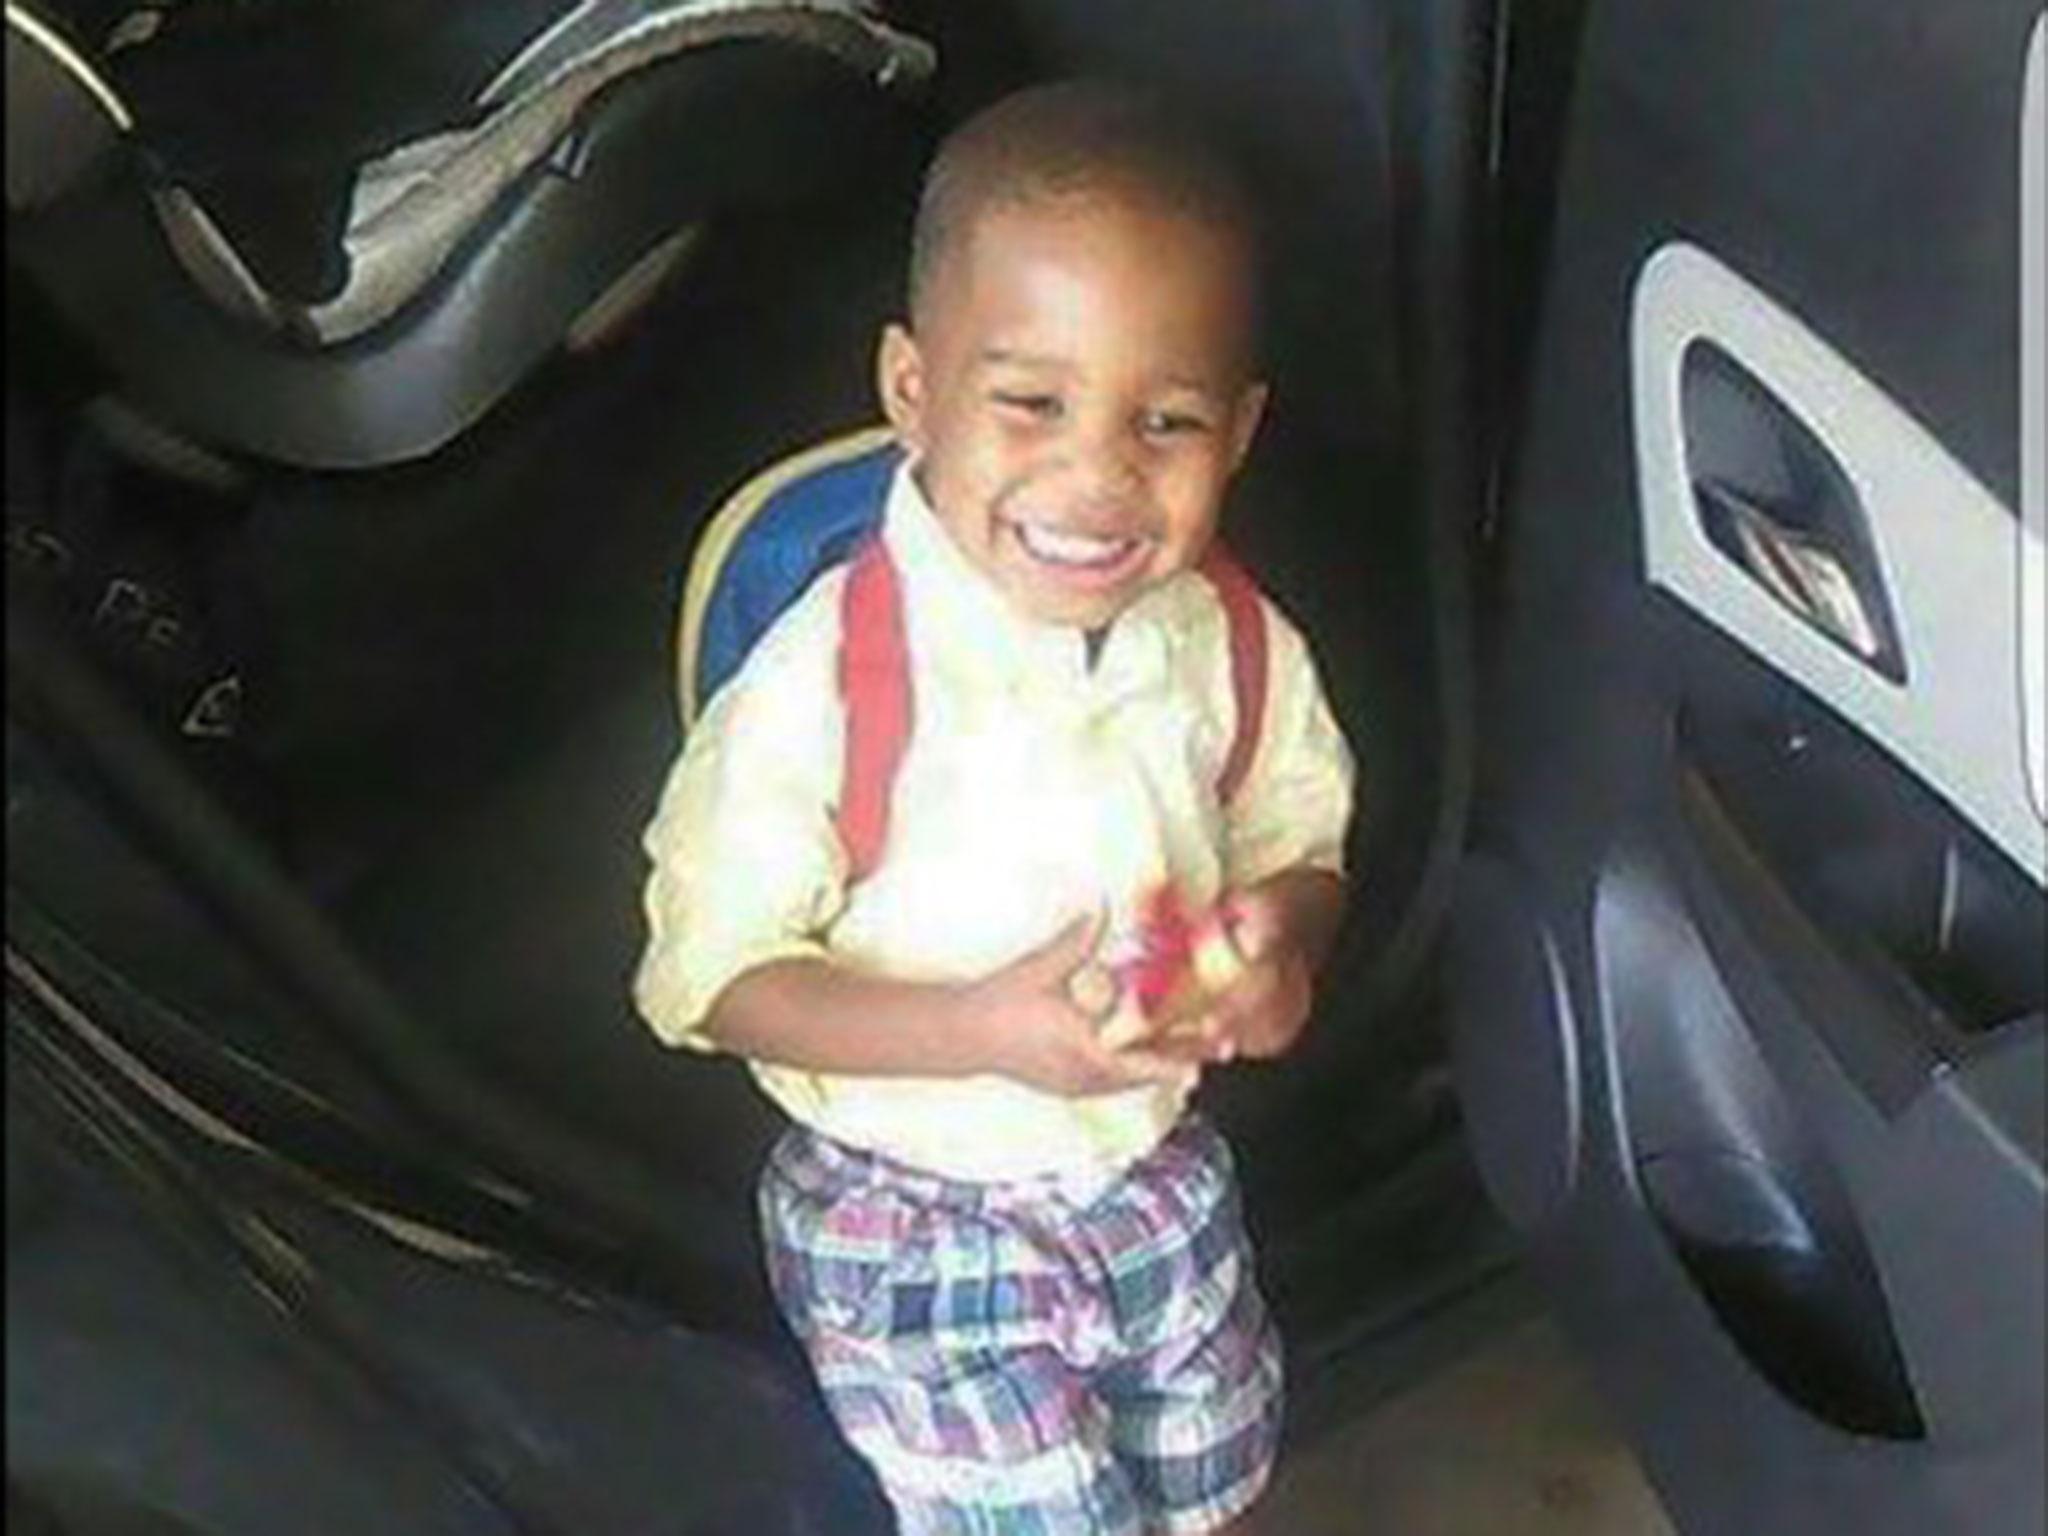 Three-year-old Acen King was shot and killed when the man got out of his car and fired